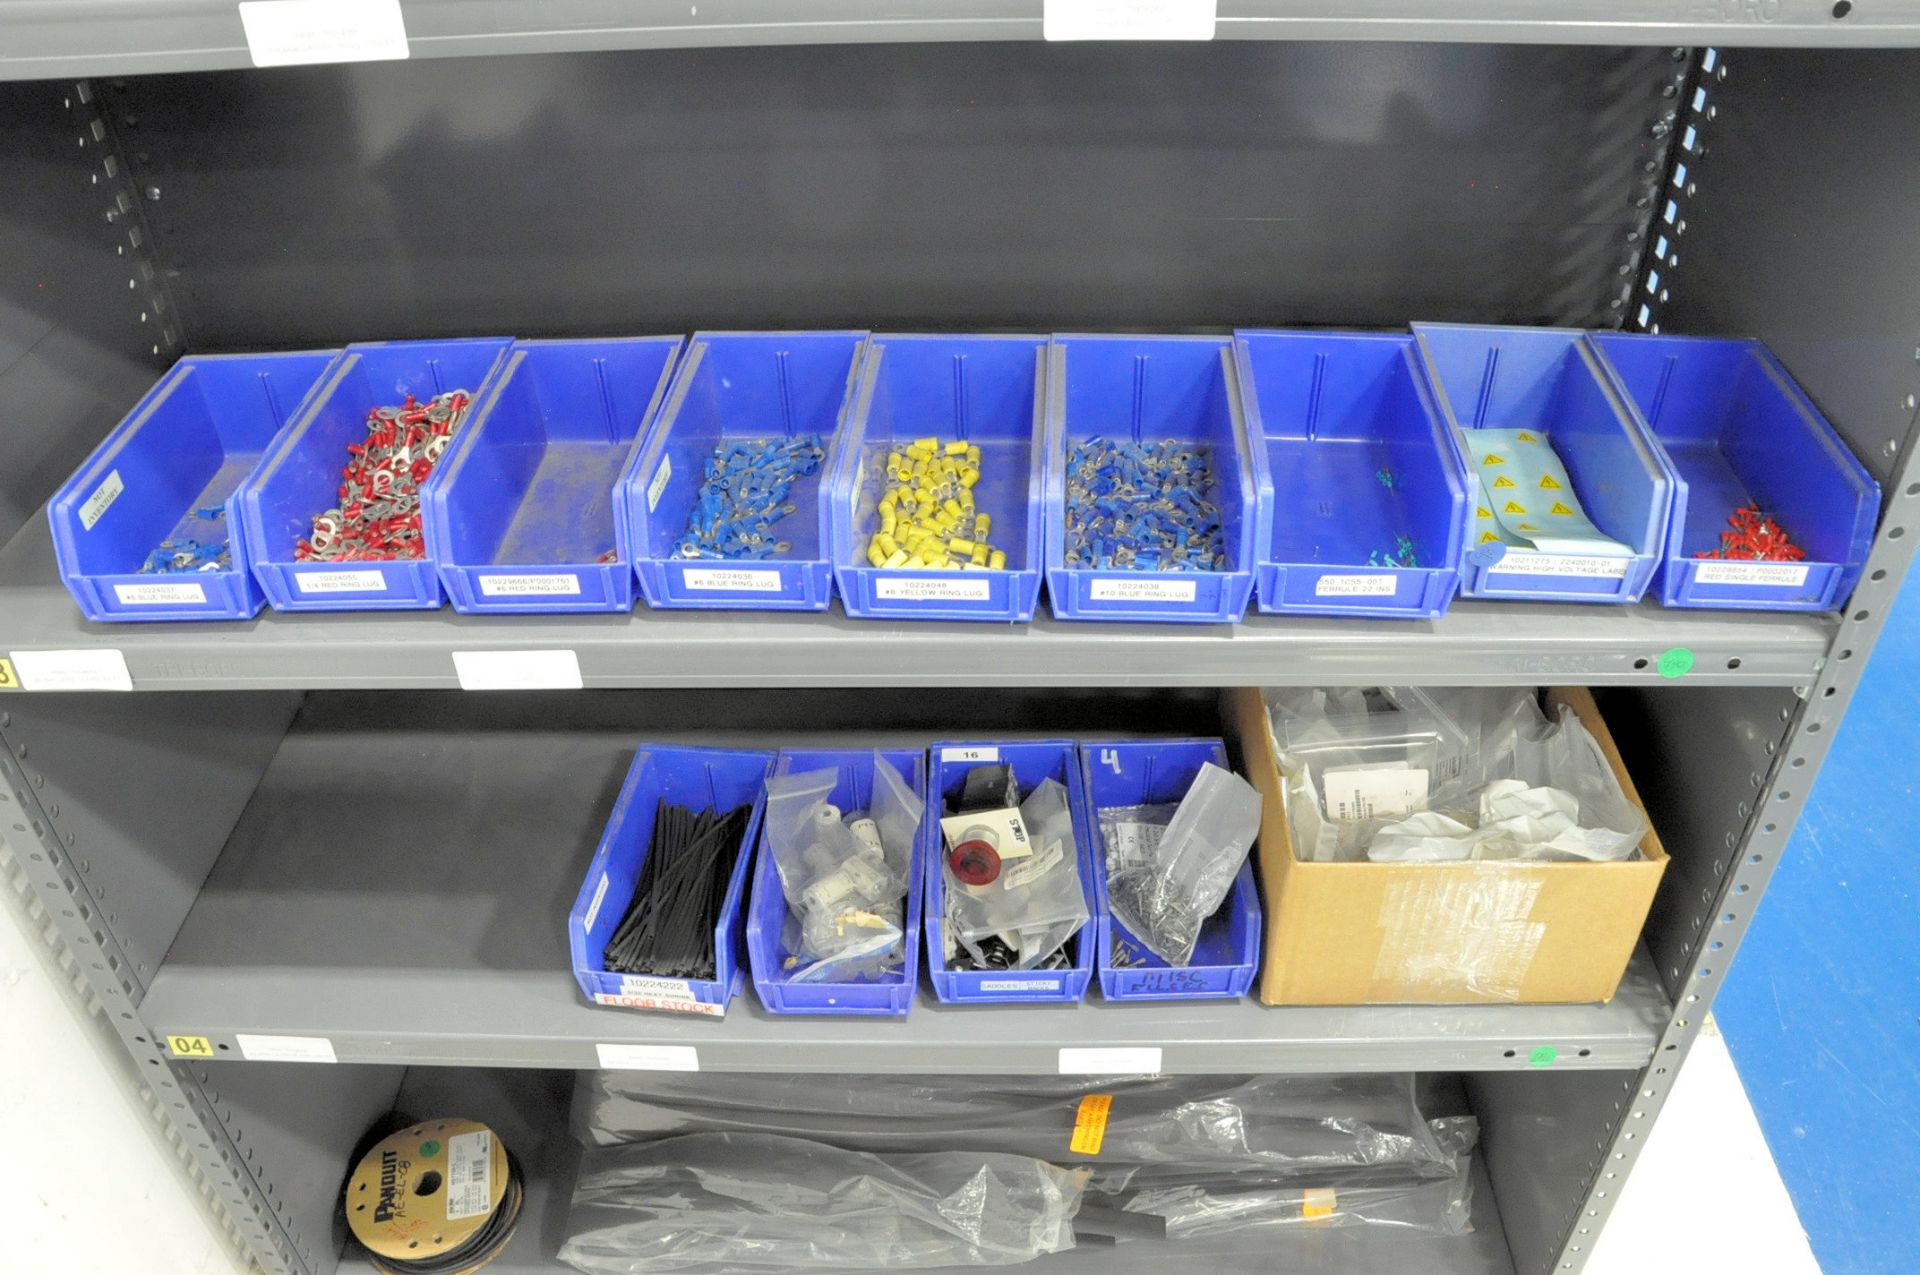 Lot-Farrells, Shrink Tubing, etc. in (1) Section, (Shelving Not Included) - Image 4 of 5